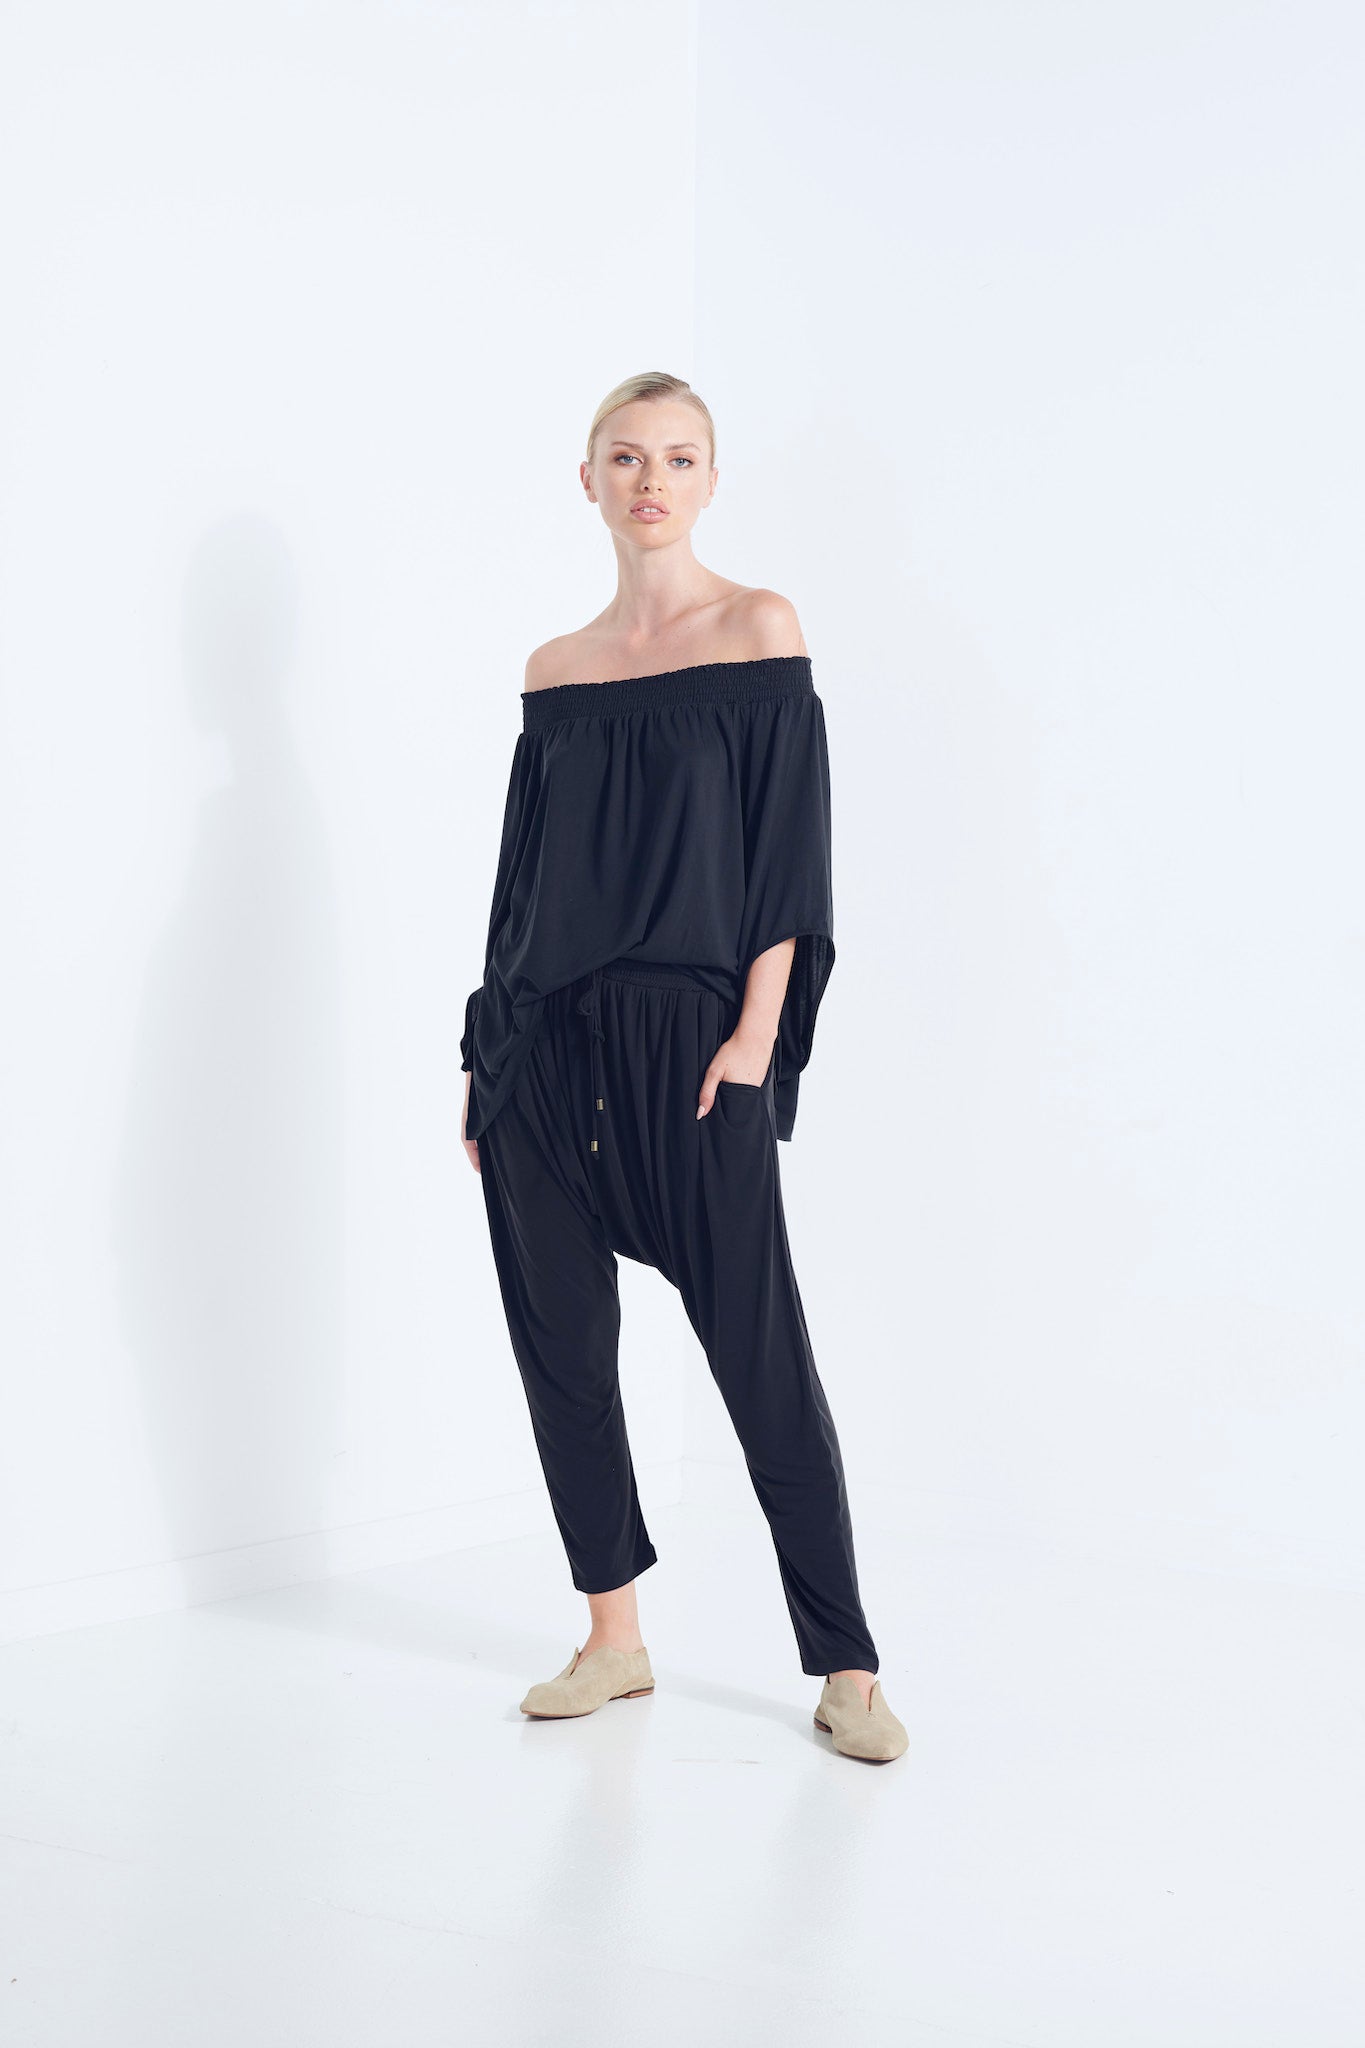 NAEVIA OFF SHOULDER TOP KNIT BEECHWOOD MODAL ELASTIC TOP WITH BELL SLEEVE DARK FRONT VIEW